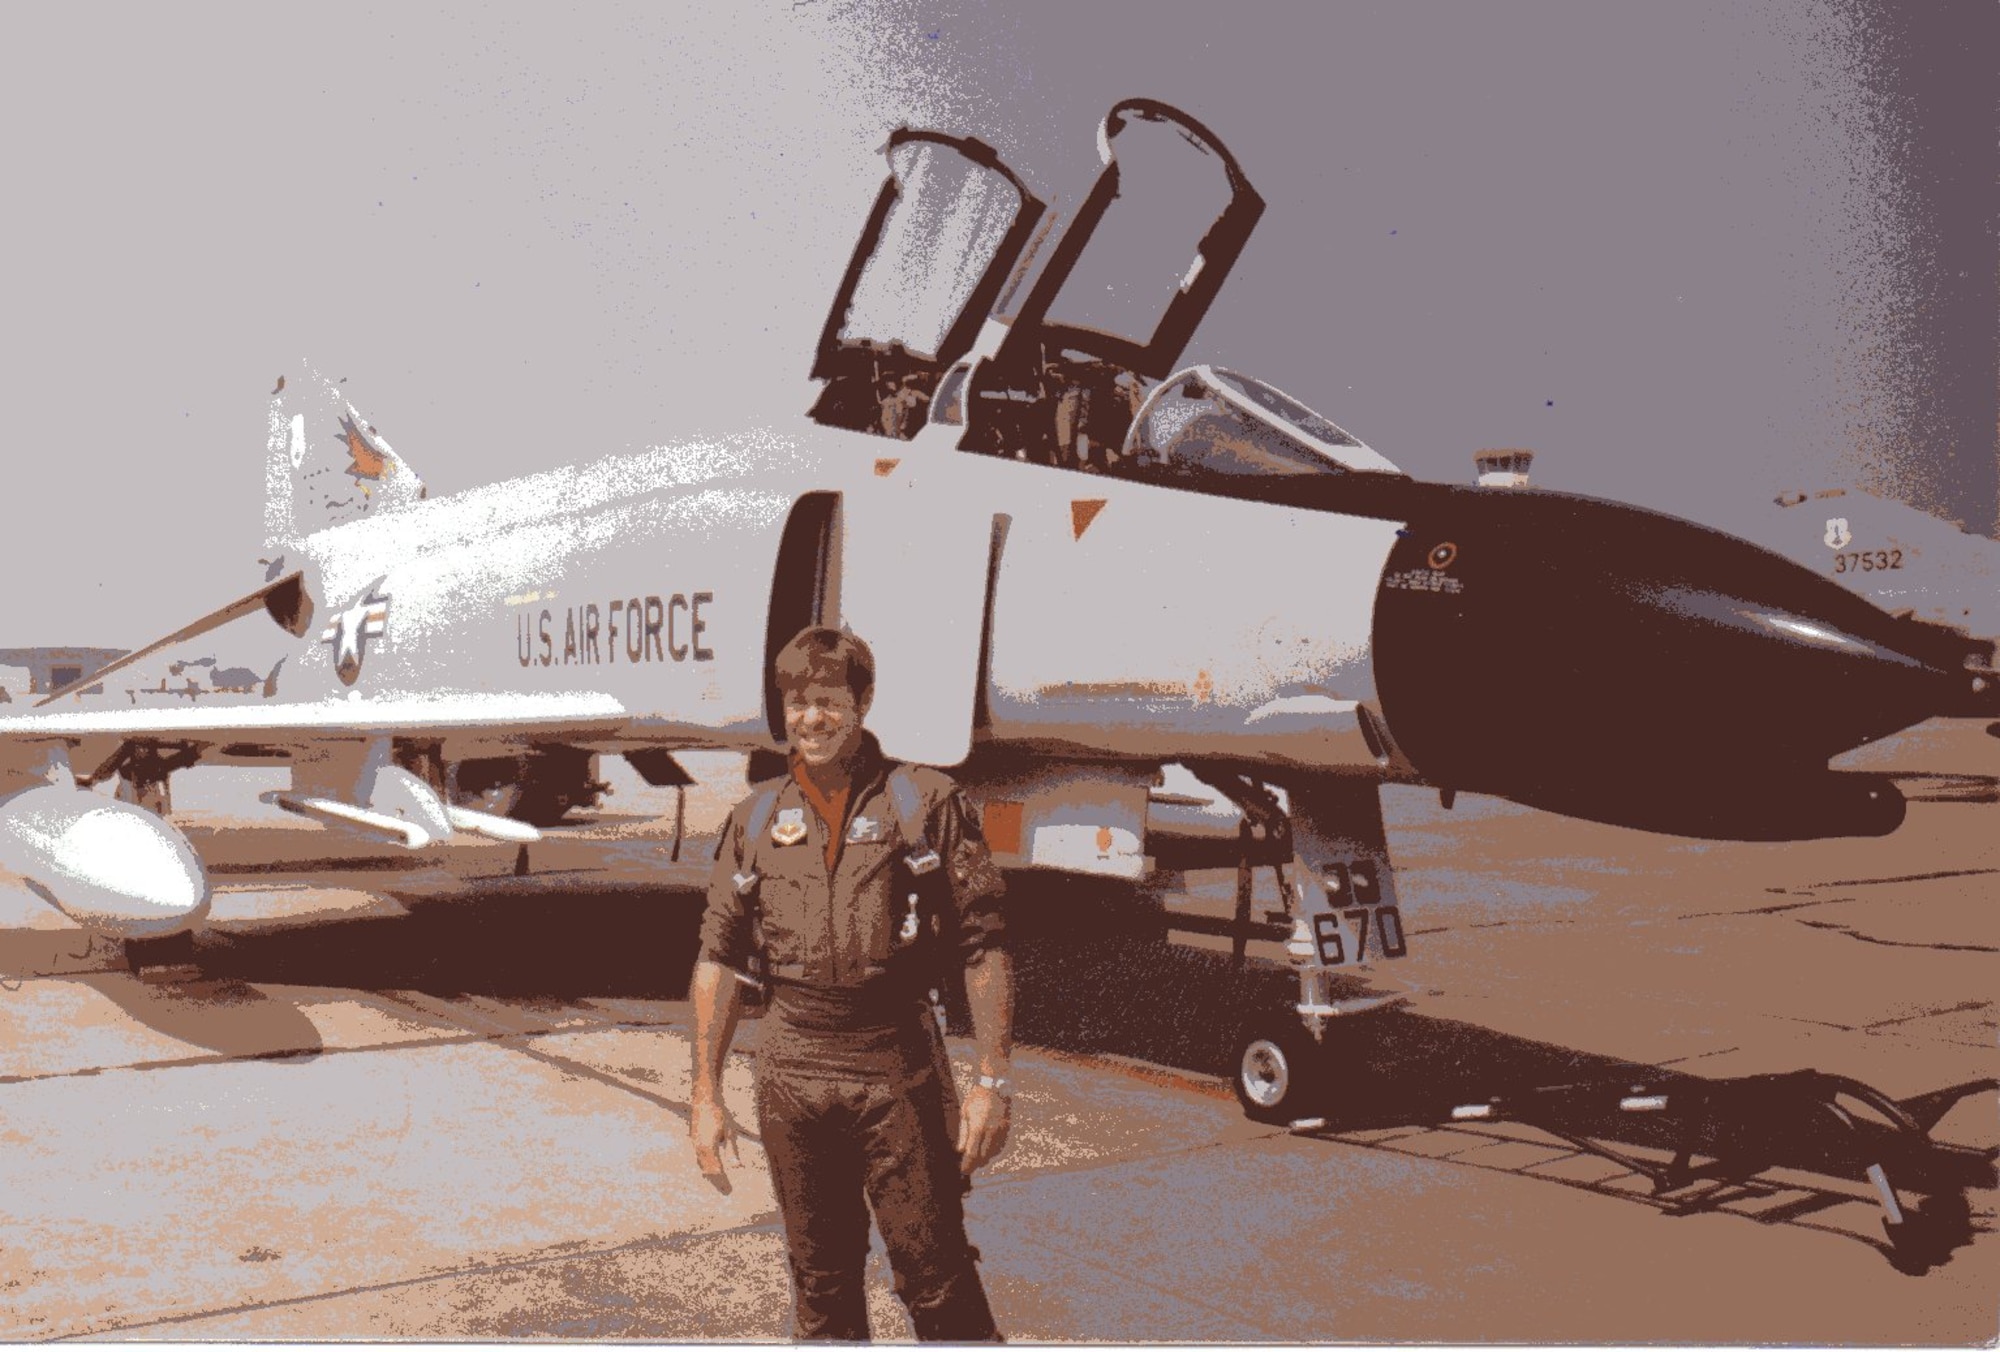 Maj. Ronald M. Moore, 123rd FIS pilot, smiles for the camera in the Florida sunshine by Oregon F-4C-21-MC 63-7670 at William Tell 1984.  He was the Top Gun pilot in the F-4 category and third overall in the meet.  Note Oregon F-4C-19-MC 63-7532 at immediate right.  Aircraft 670 ended up at Taegu AB, Korea as a battle damage repair ship, whilst 532 is preserved at Barksdale AFB, LA.  (142FW/HO Archives)